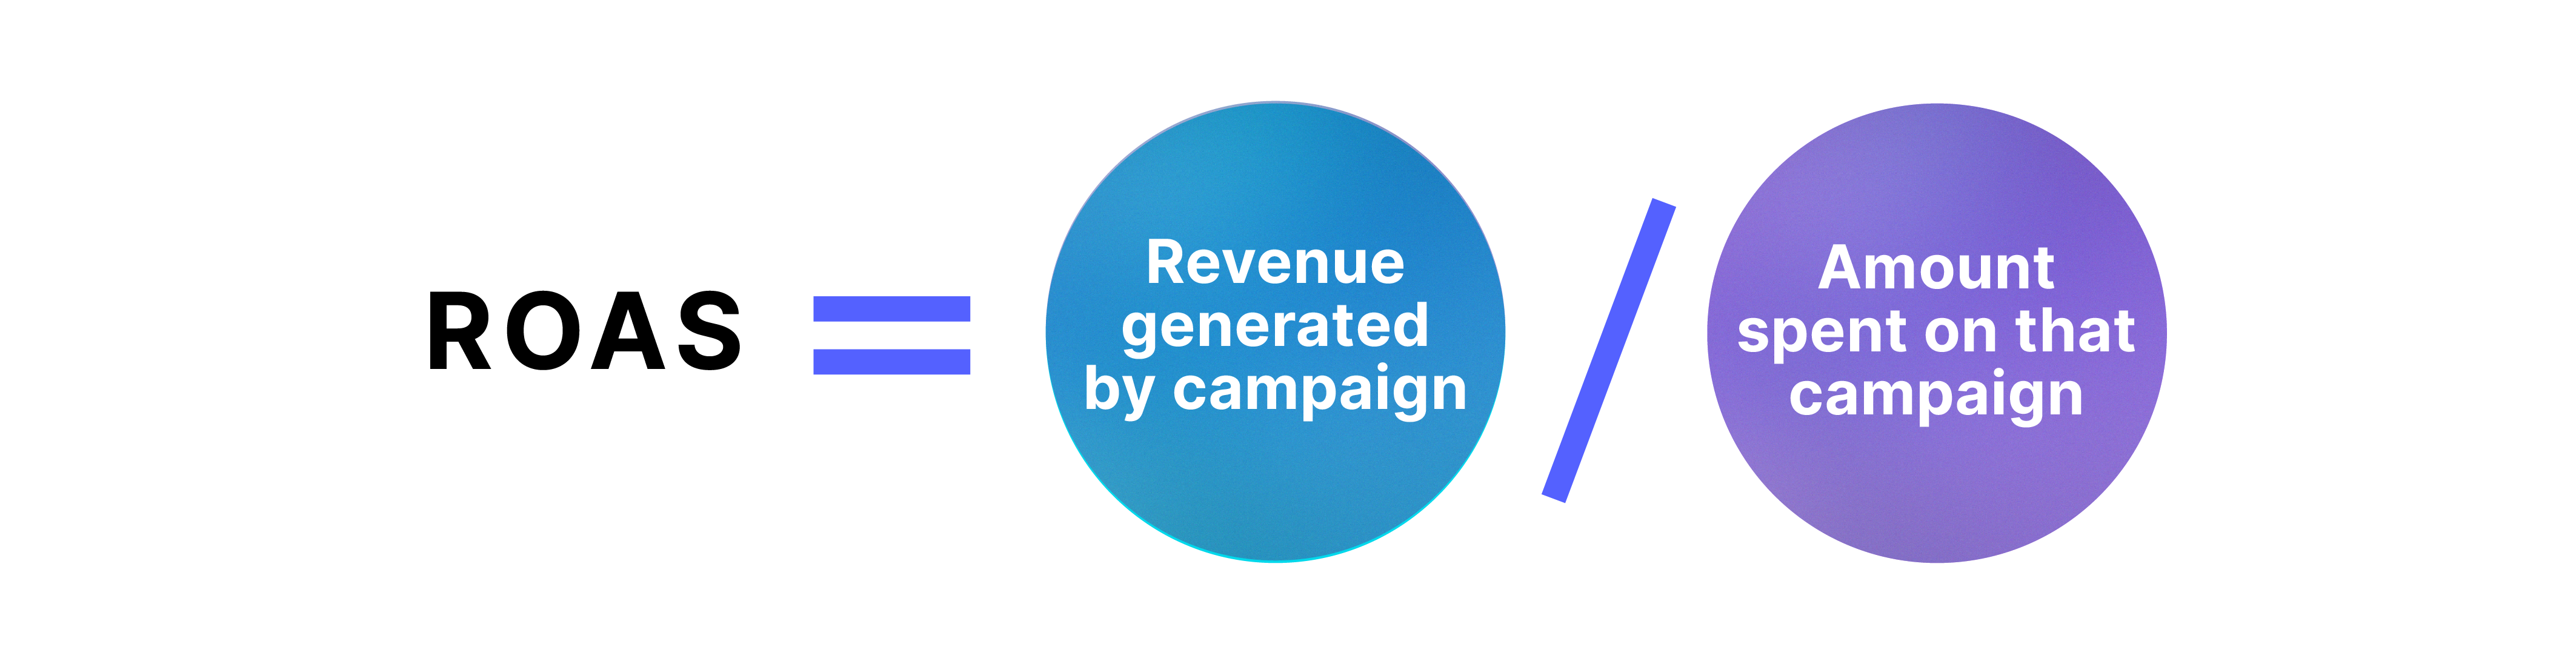 ROAS = Revenue generated by campaign / Amount spent on that campaign